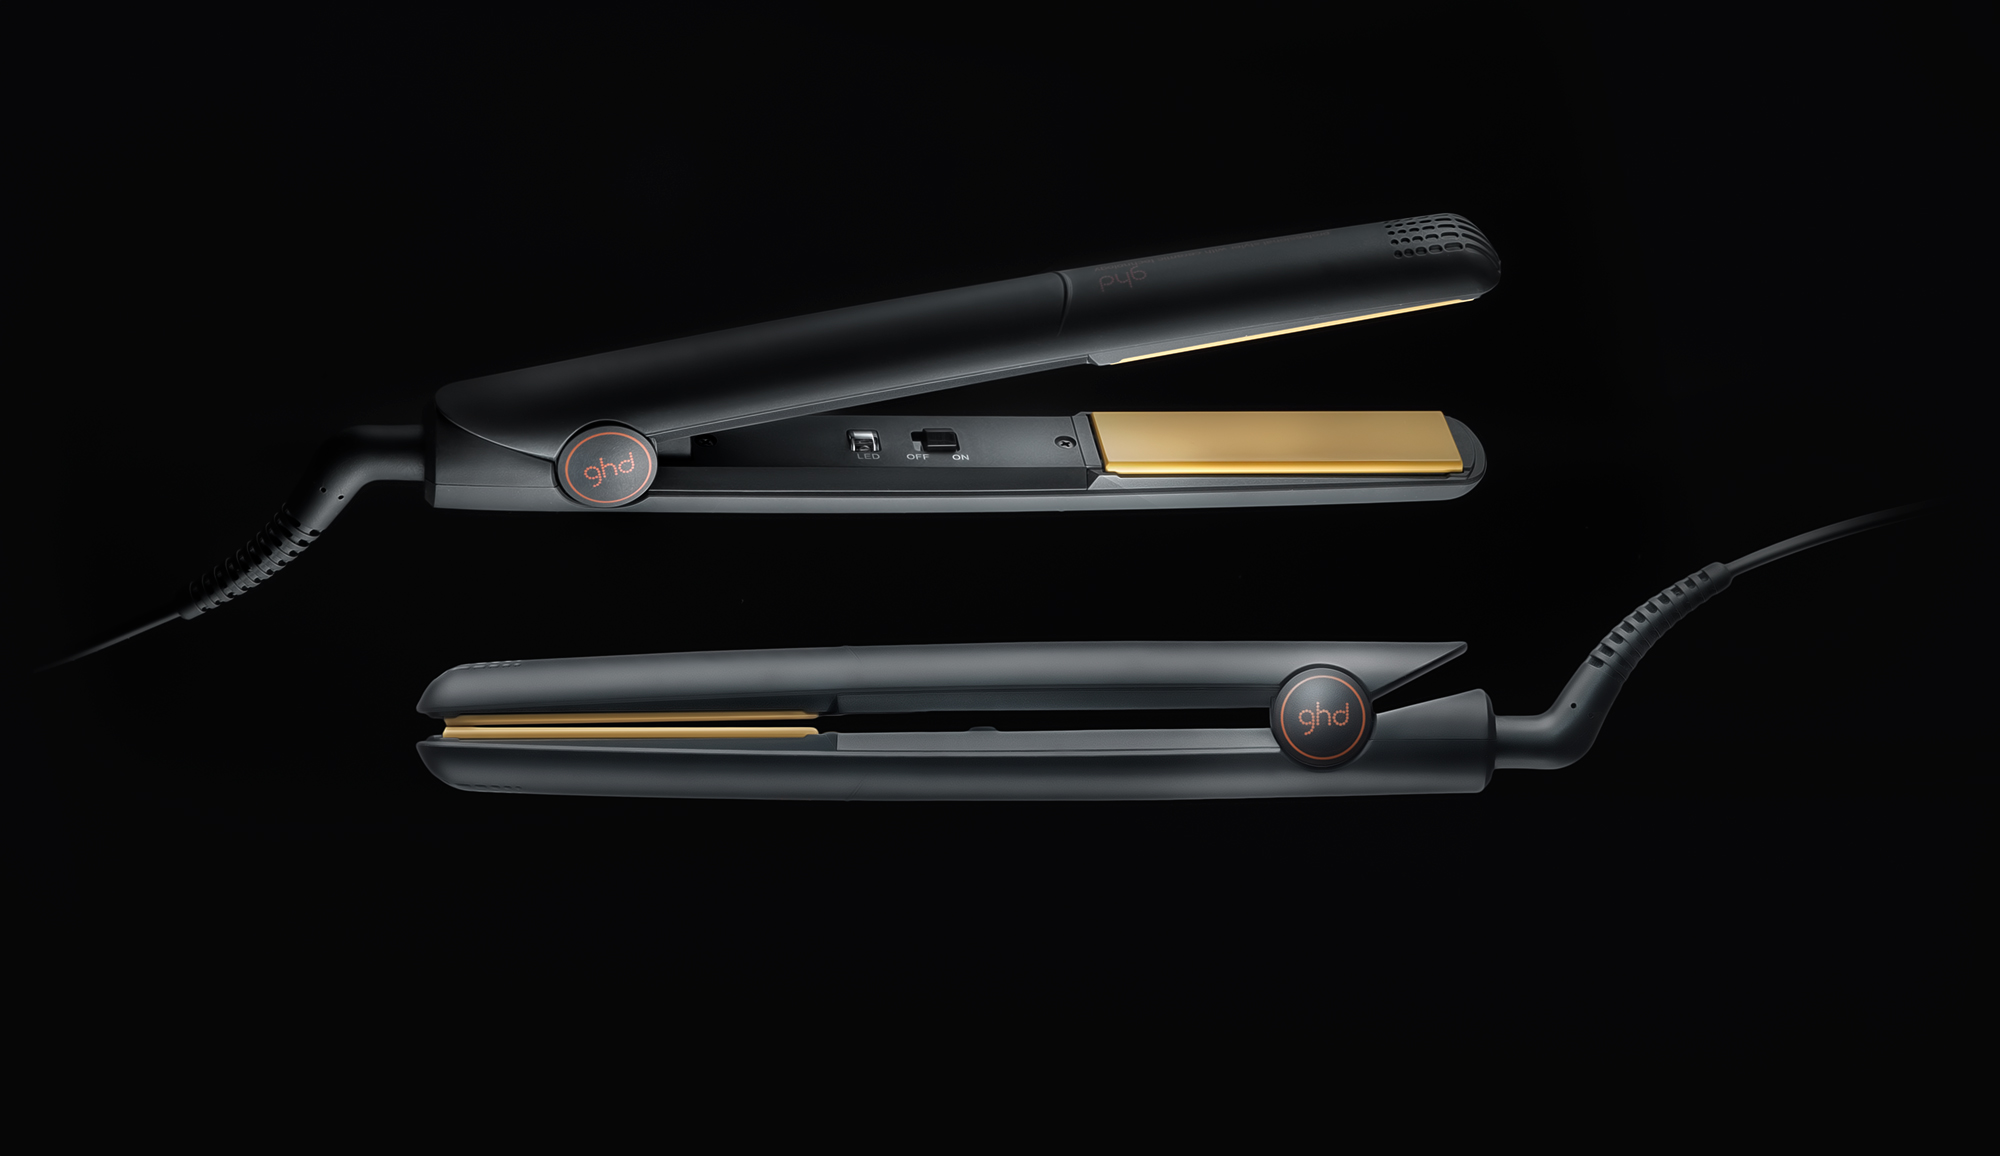 DAVID-LUDN_GHD-low-res-Product-shot.jpg